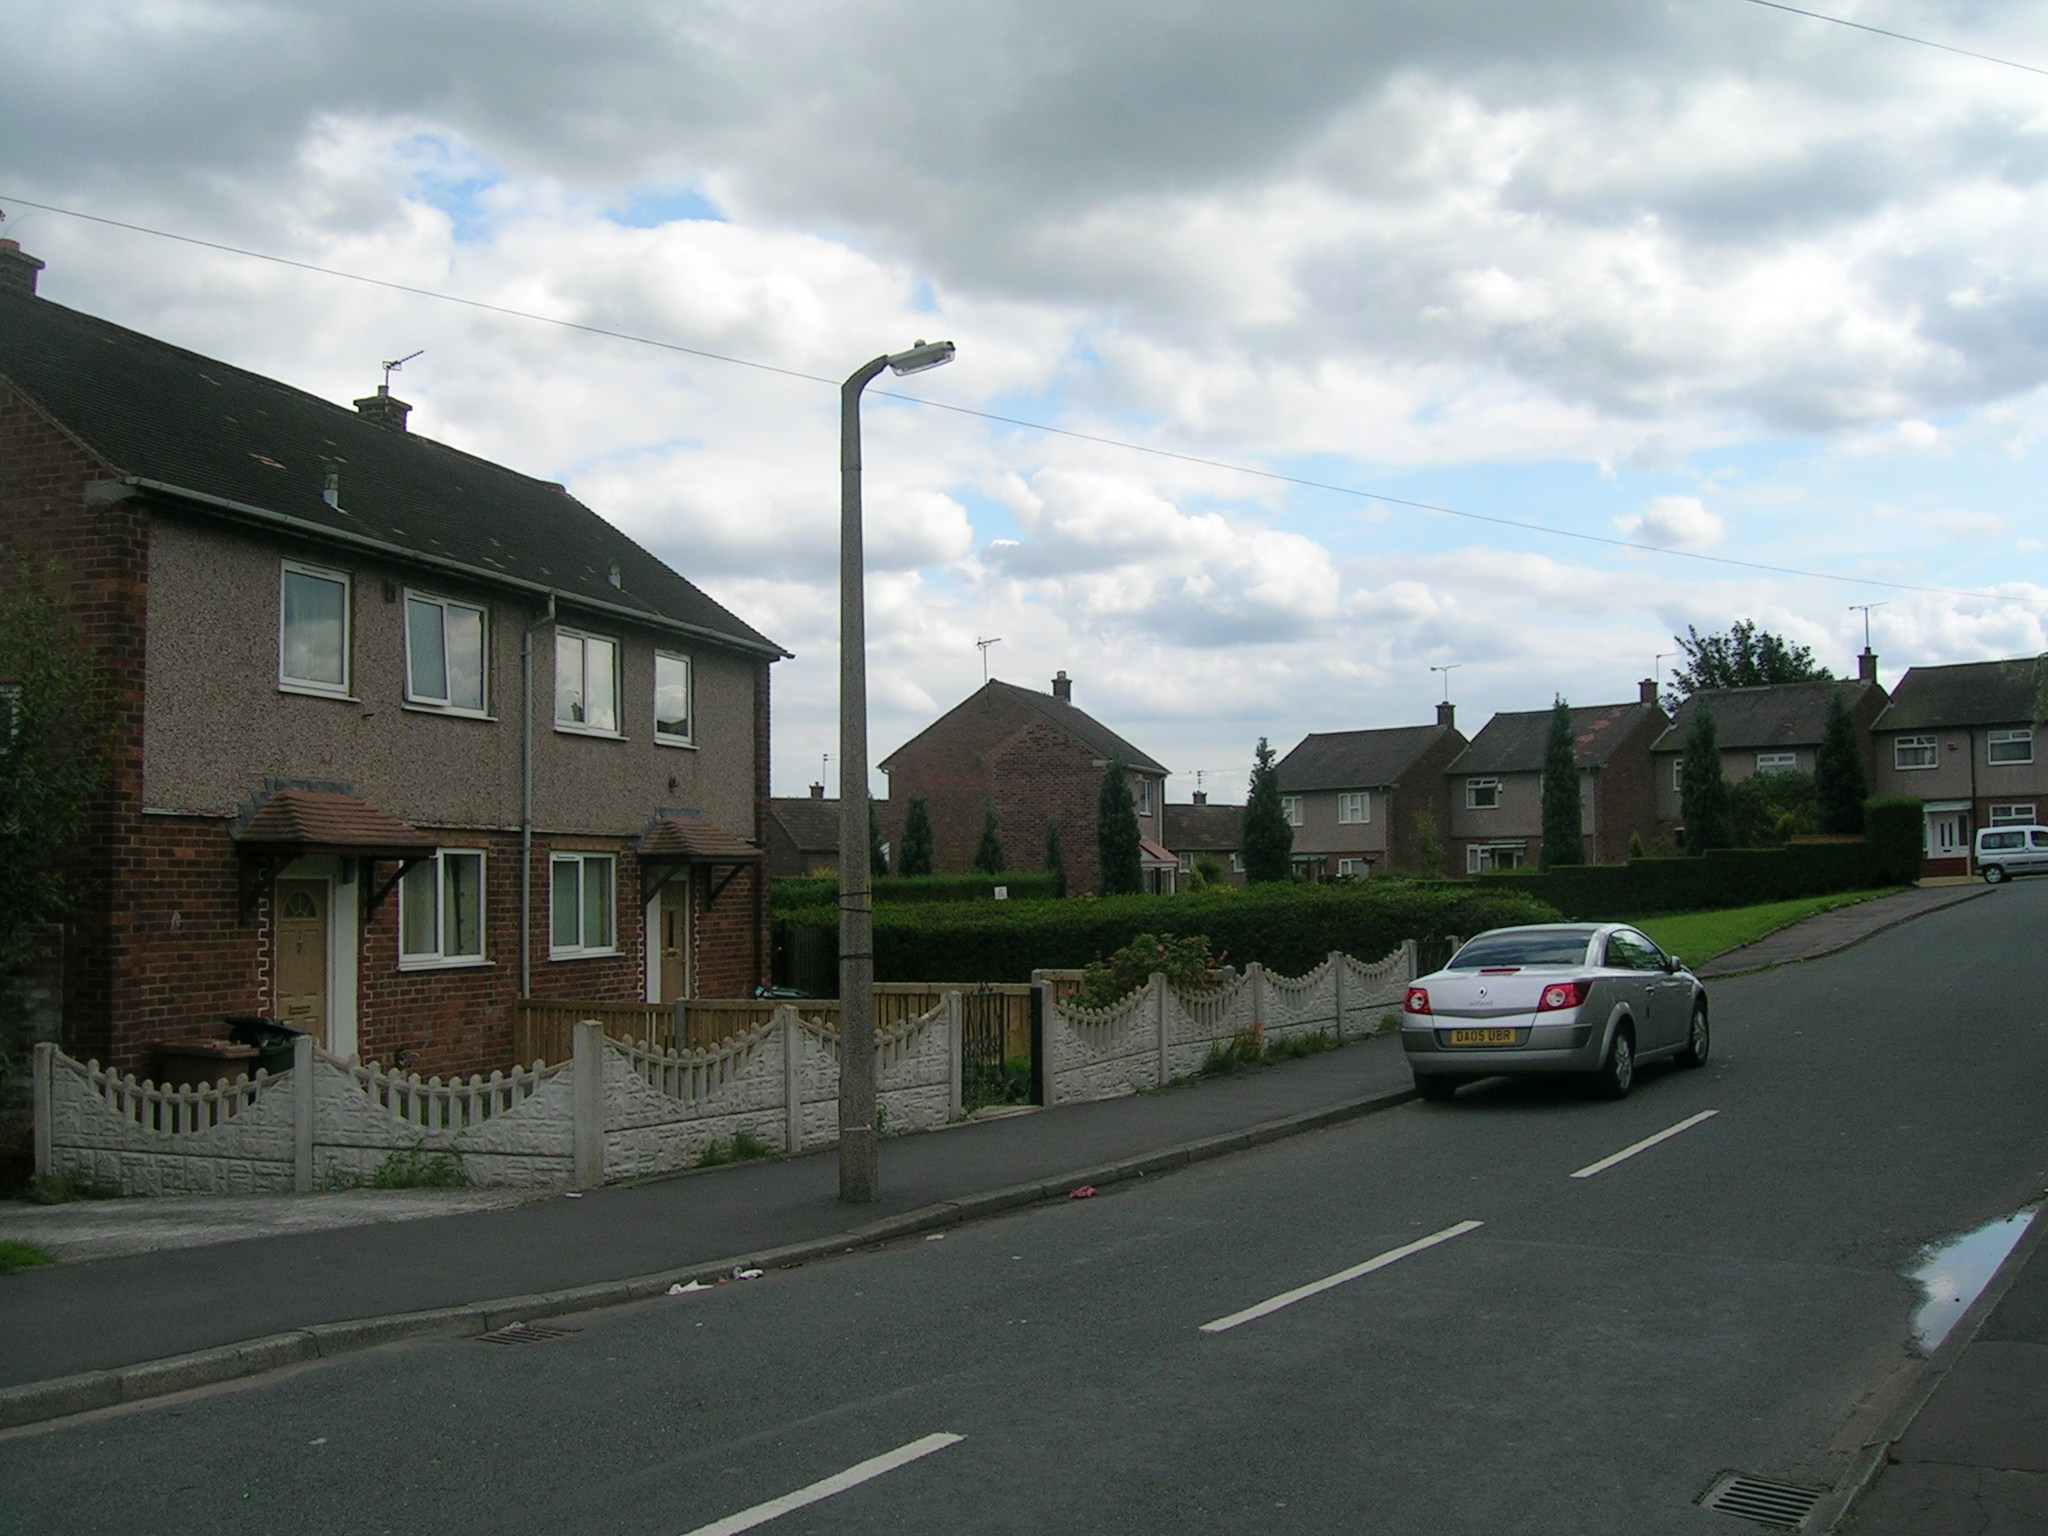 an image of cars parked in front of some houses